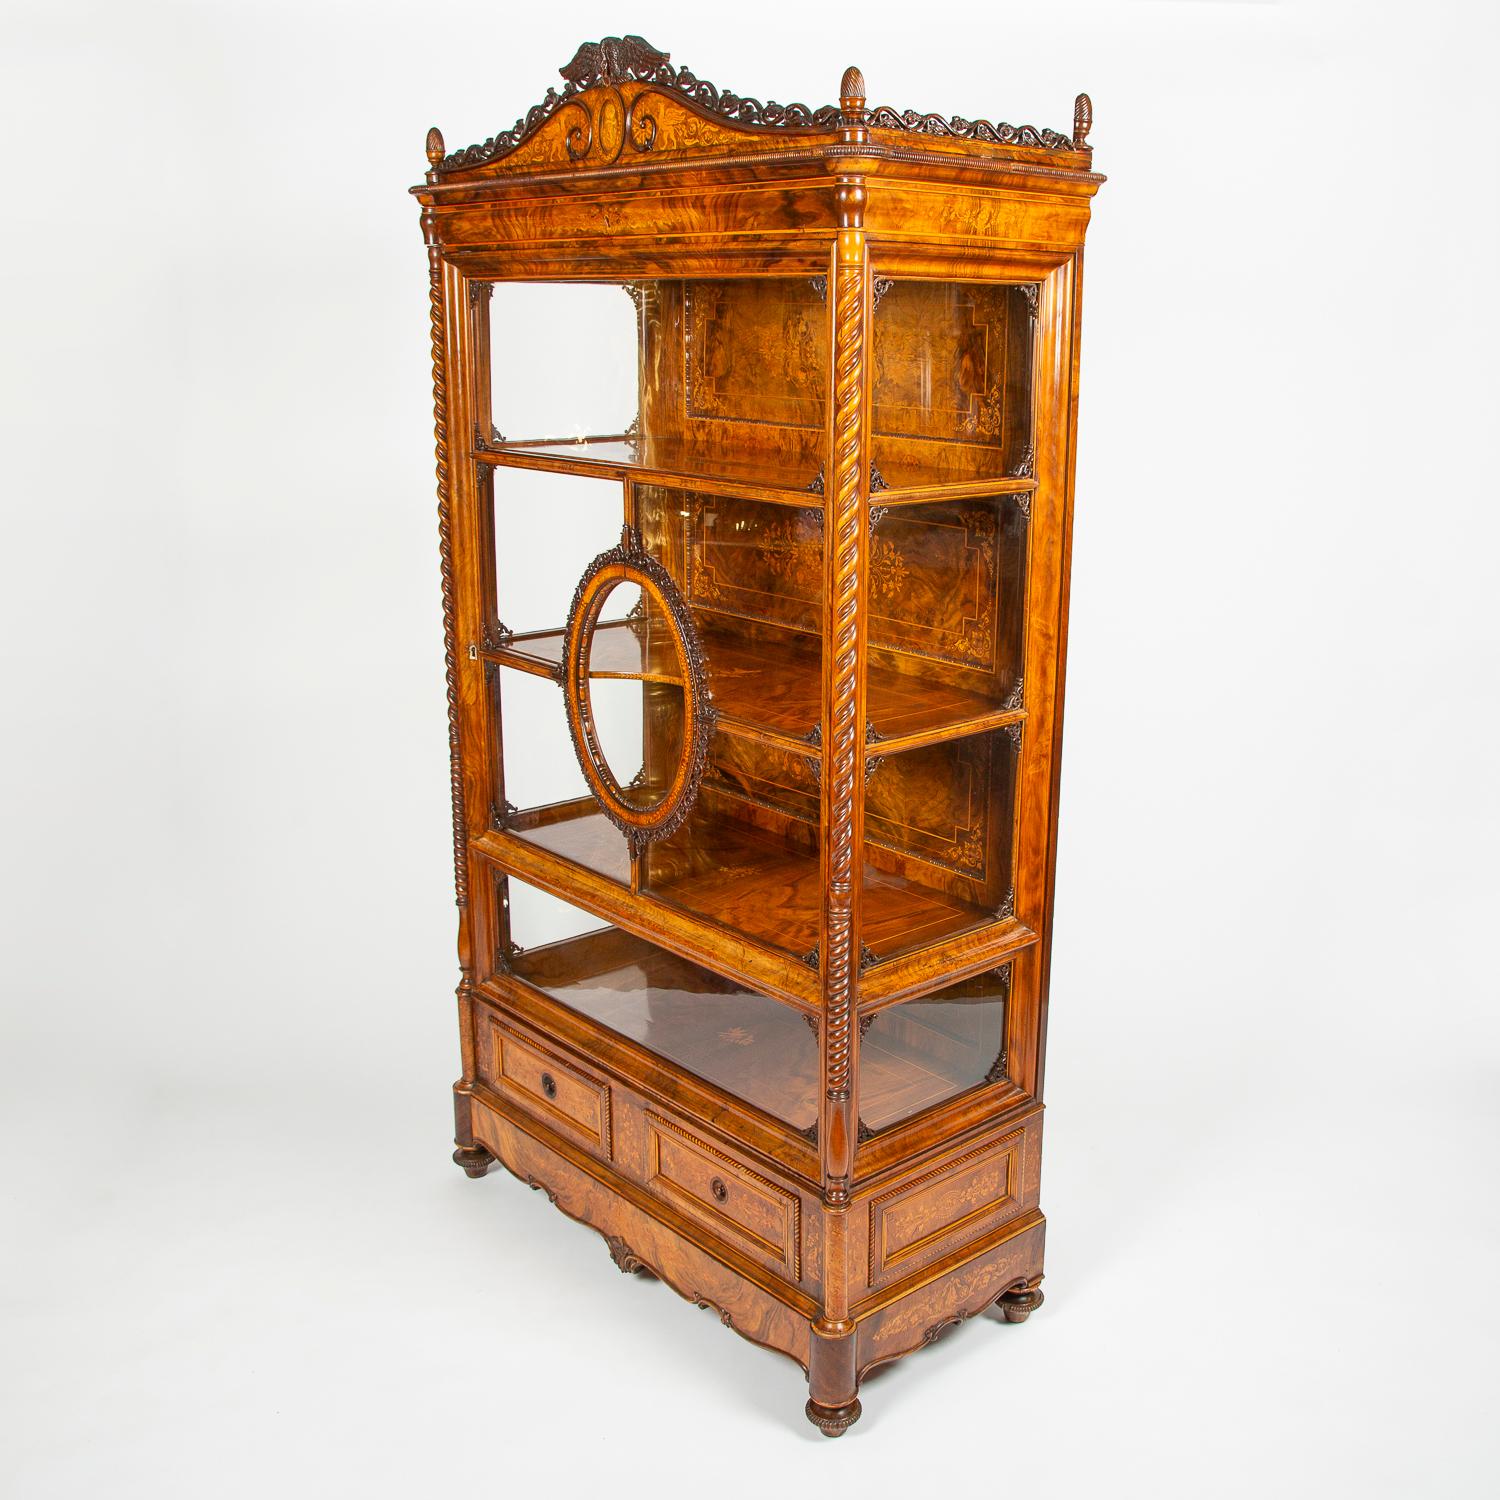 A very high quality mid-19th century carved and inlaid walnut display cabinet, with the monogram of Großherzog (Grand Duke) Friedrich I of Baden. 

The interior of the cabinet has 3 shelves, with the back is decorated with highly detailed inlay,